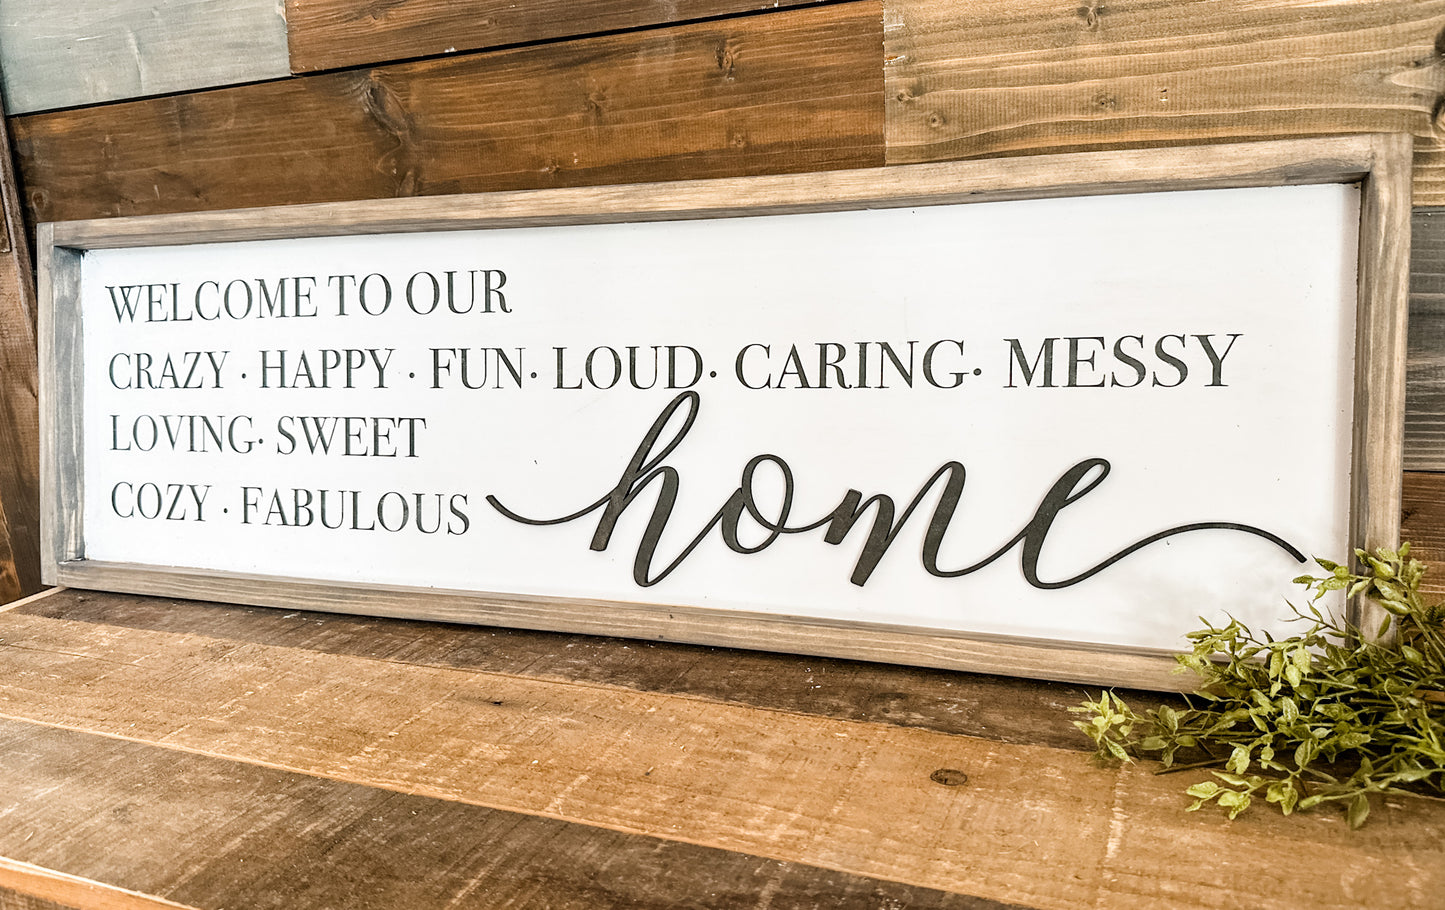 PAINTED - Welcome To Our.......Home (10x36" Medium Framed Plank)